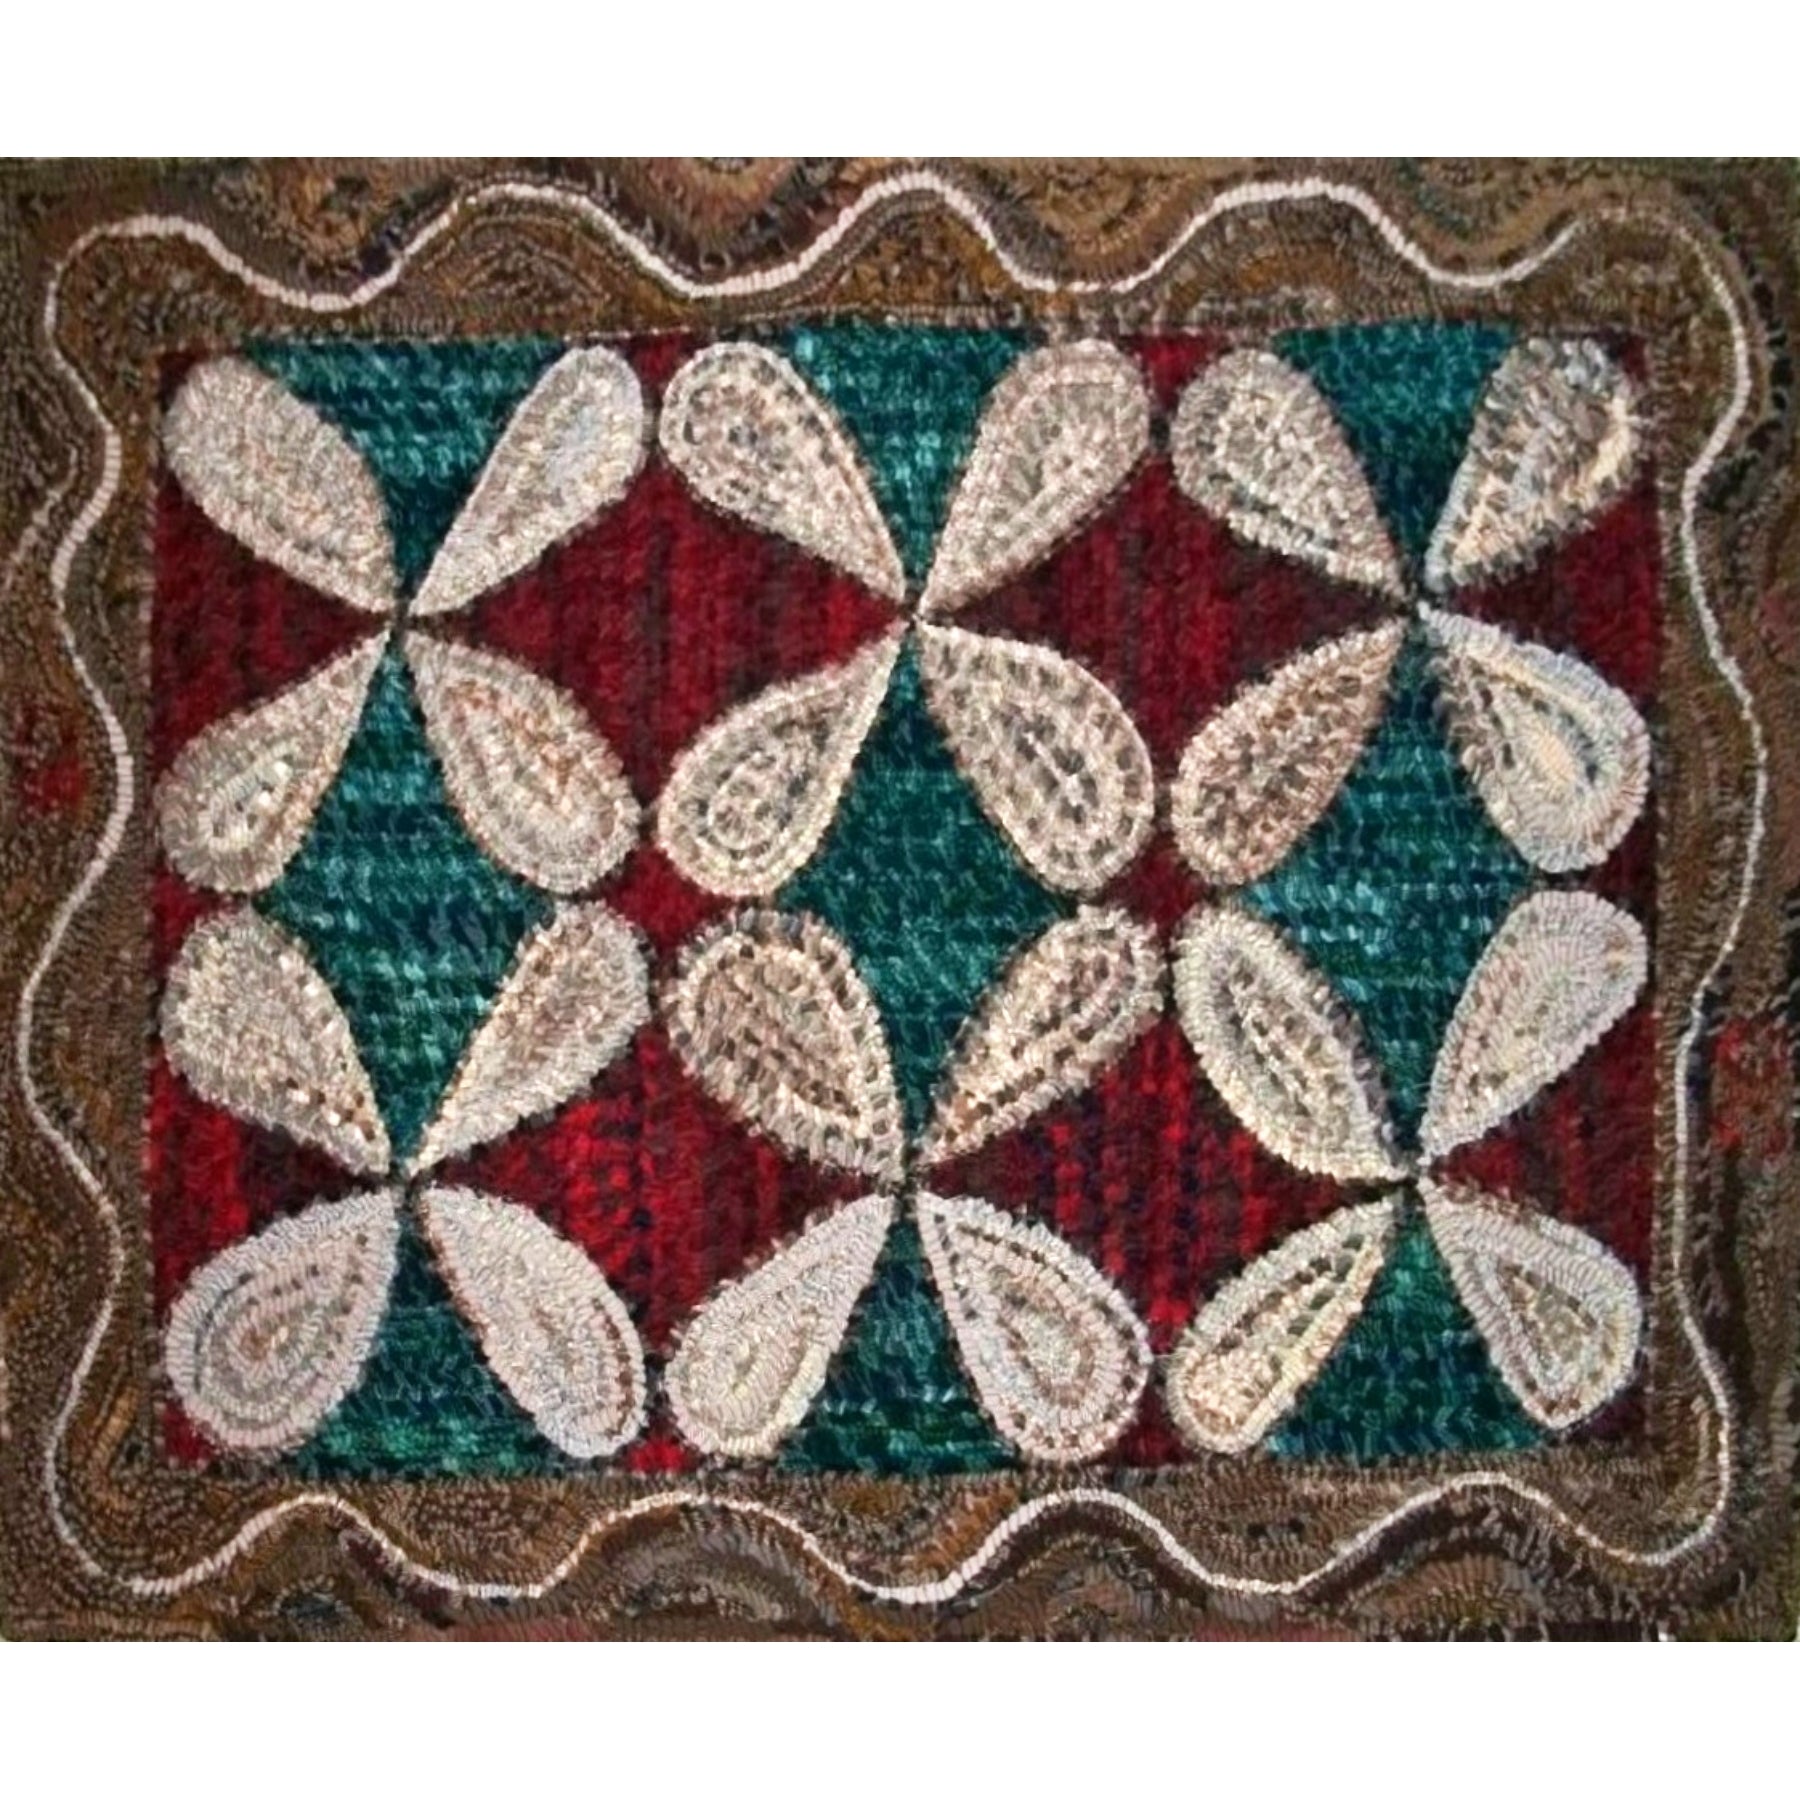 Floral Bed Rug, Six, rug hooked by Norm Bradley